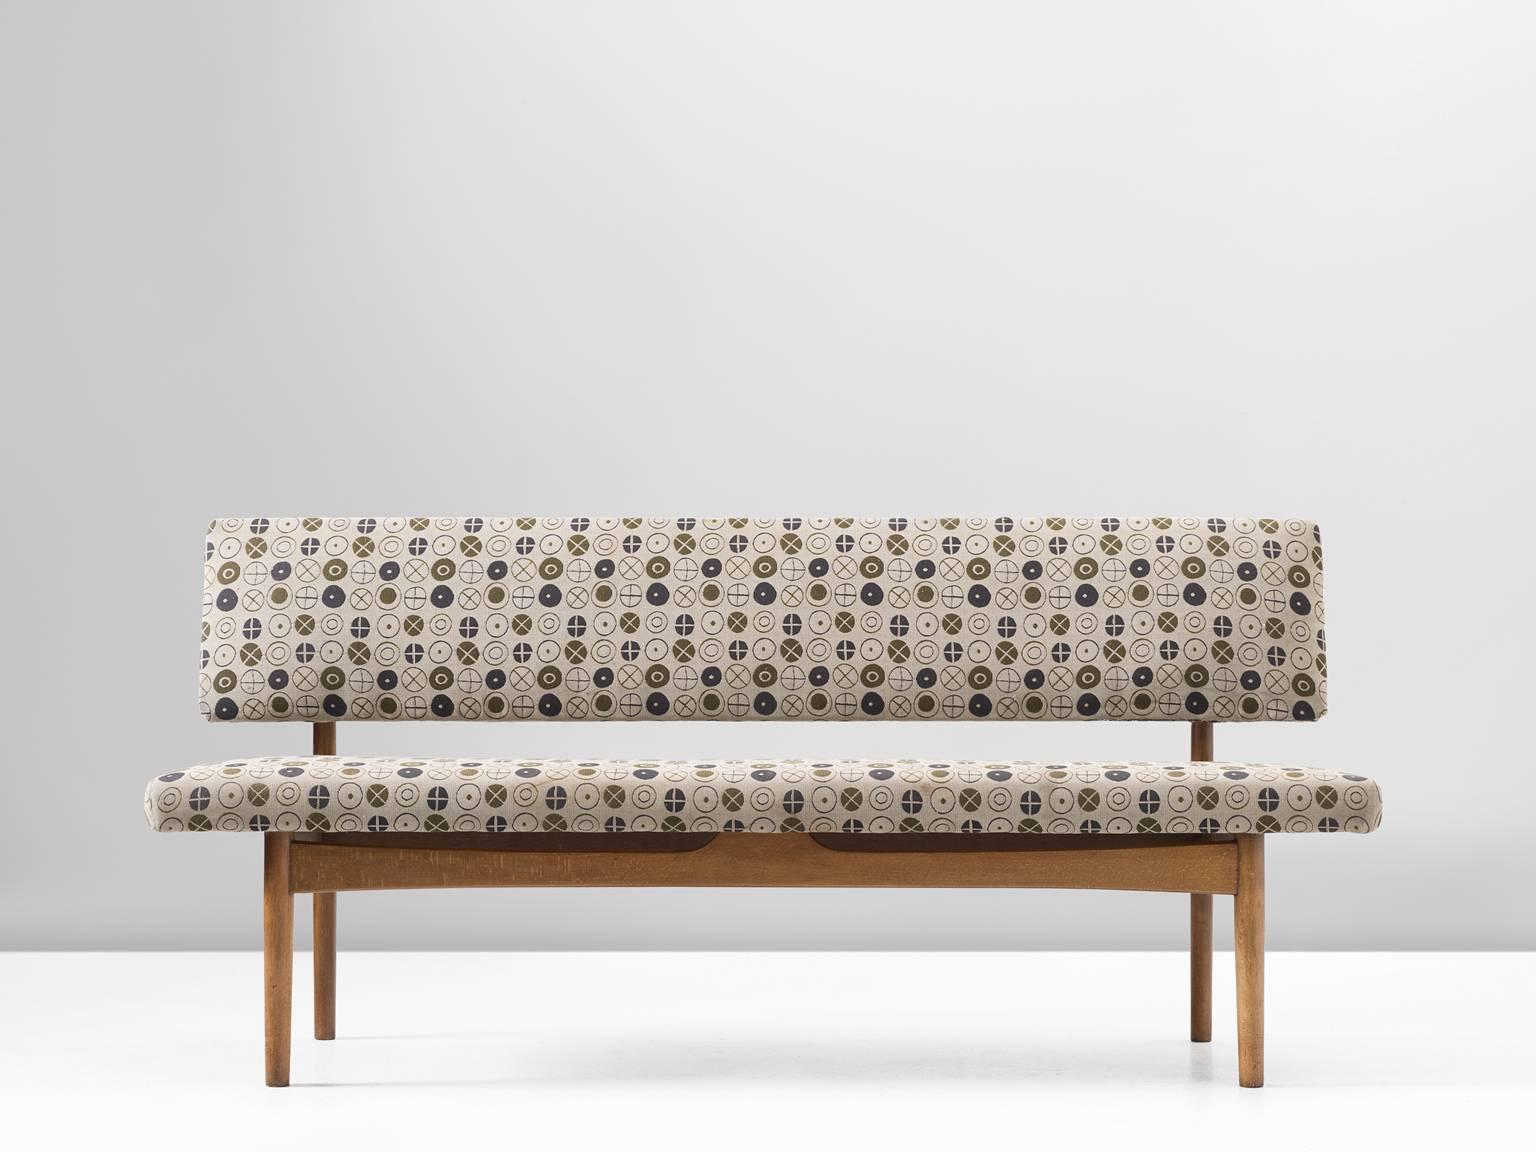 Sofa by Børge Mogensen, fabric and oak, 1960s.

This small sofa from the 1960s is upholstered with the iconic fabric Circles 002 Fatigue designed by Charles & Ray Eames for Maharam in 1947. This abstract, patterned fabric is a suiting fit for the